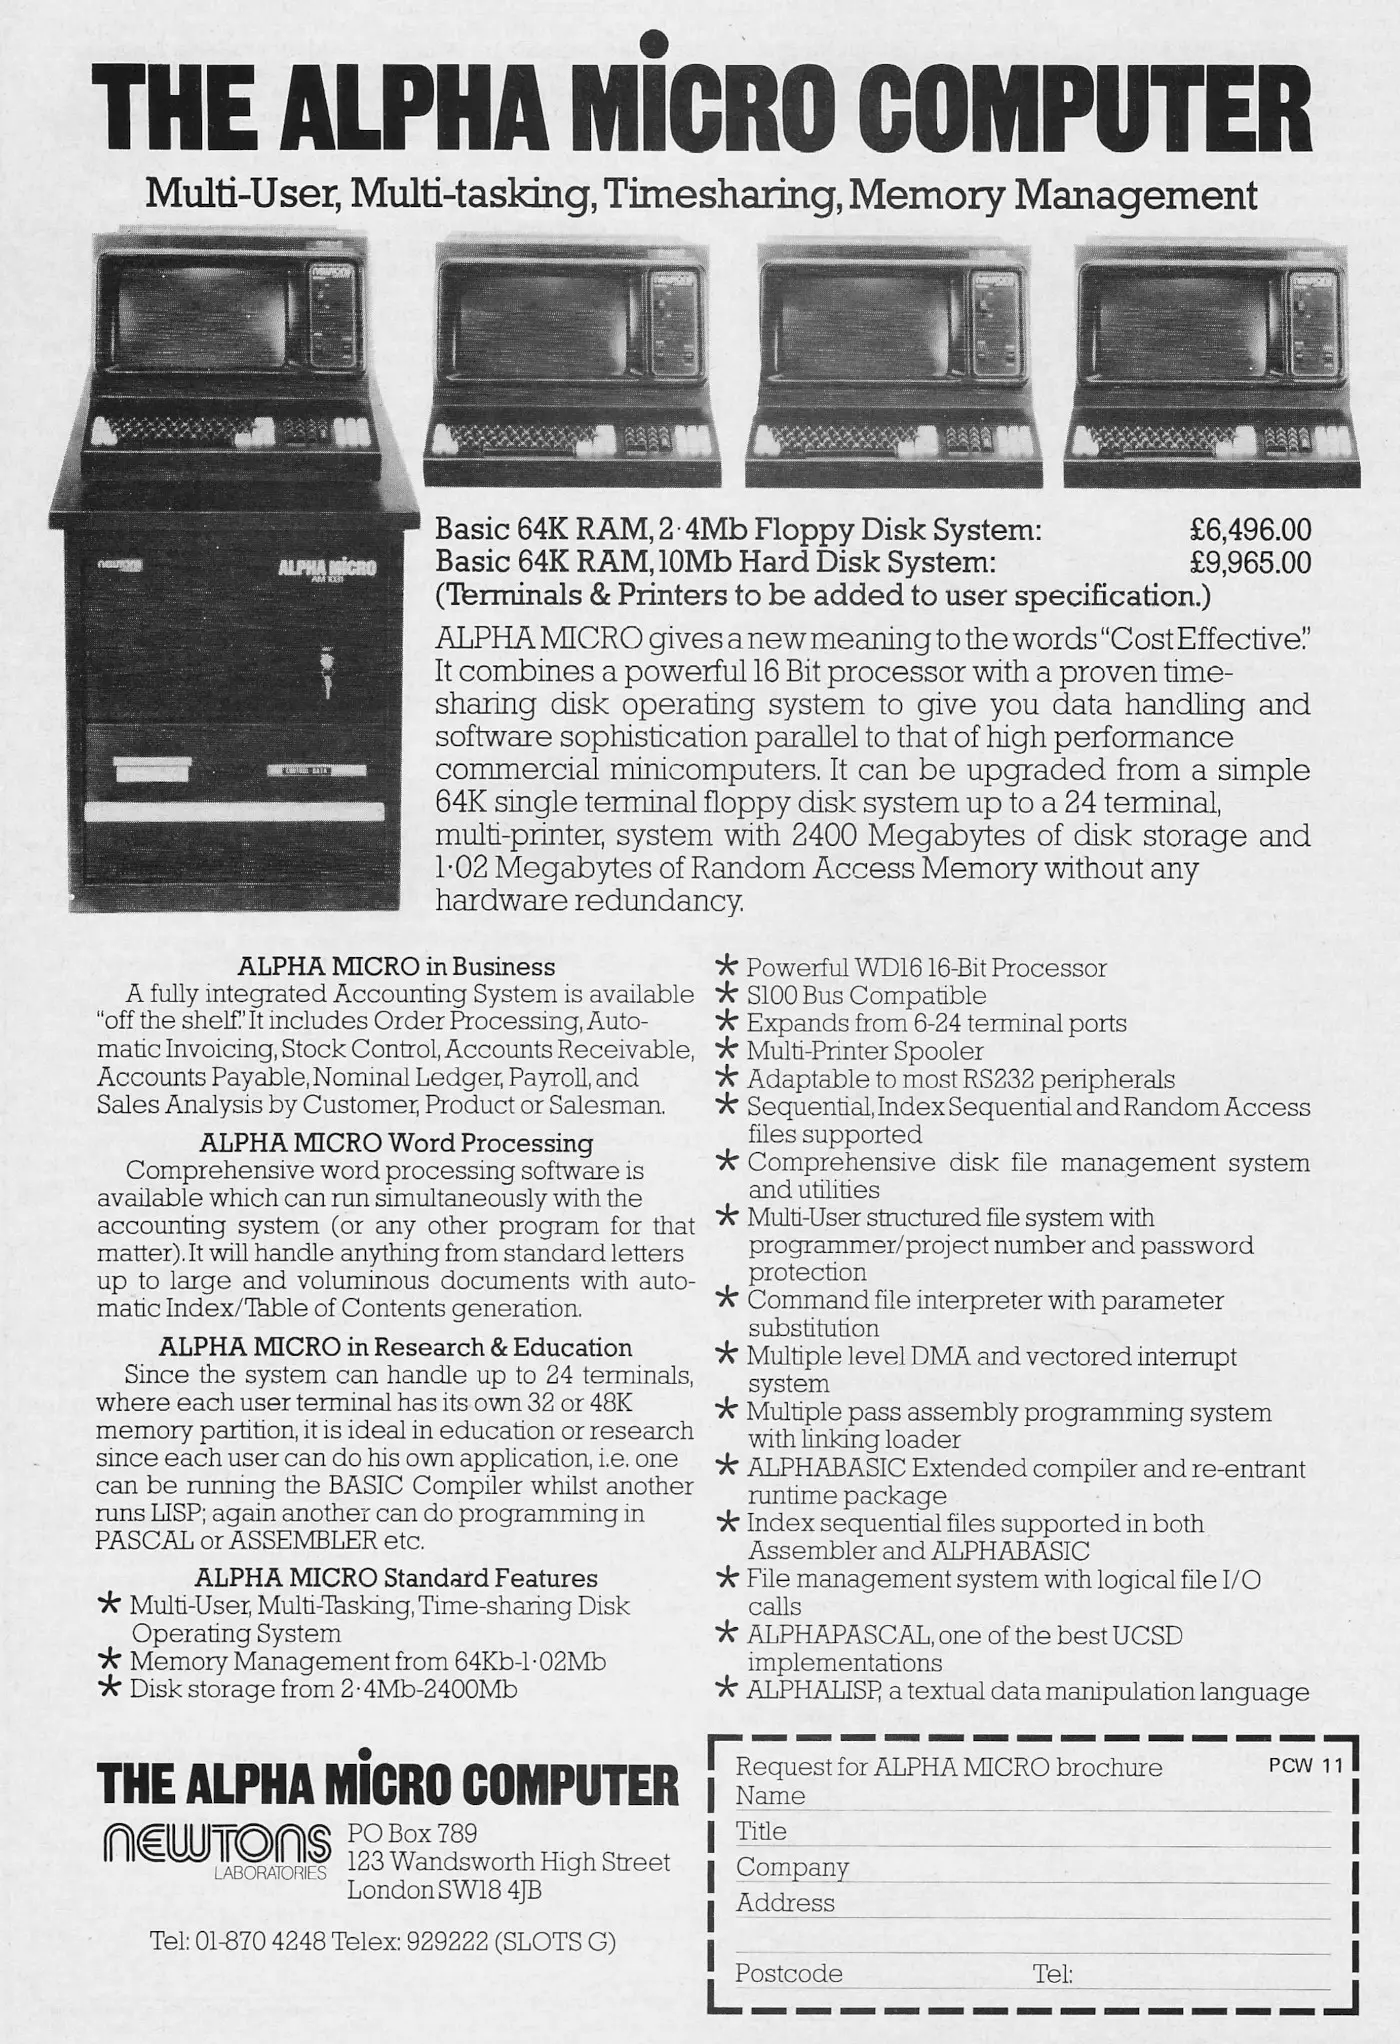 Alpha Micro Advert: The Alpha Micro Computer: Multi-user, Multi-tasking, Timesharing, Memory Management, from Personal Computer World, January 1980